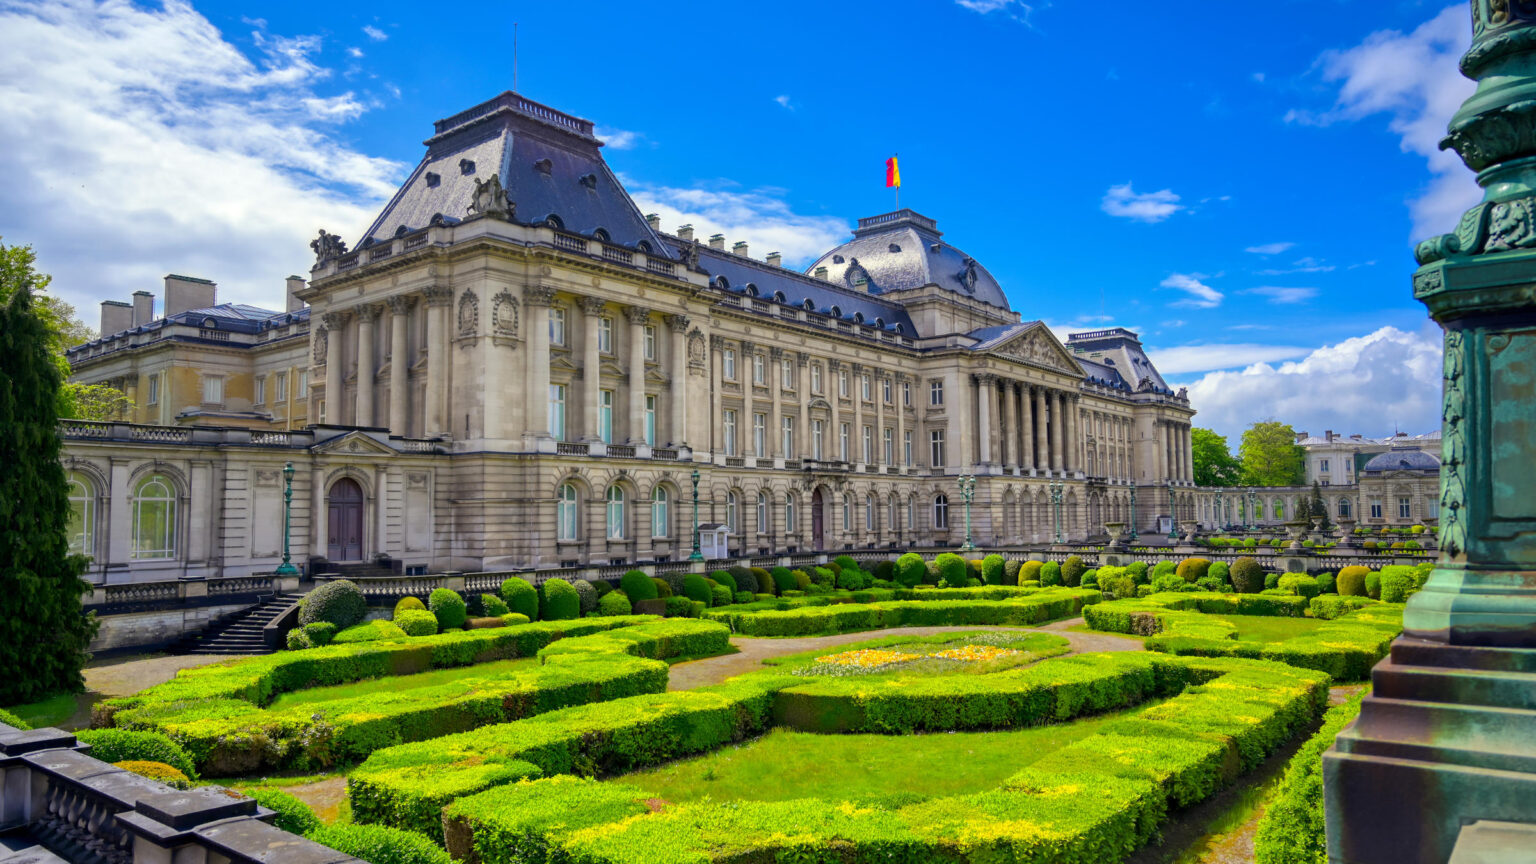 Visit the Palais Royal in Brussels